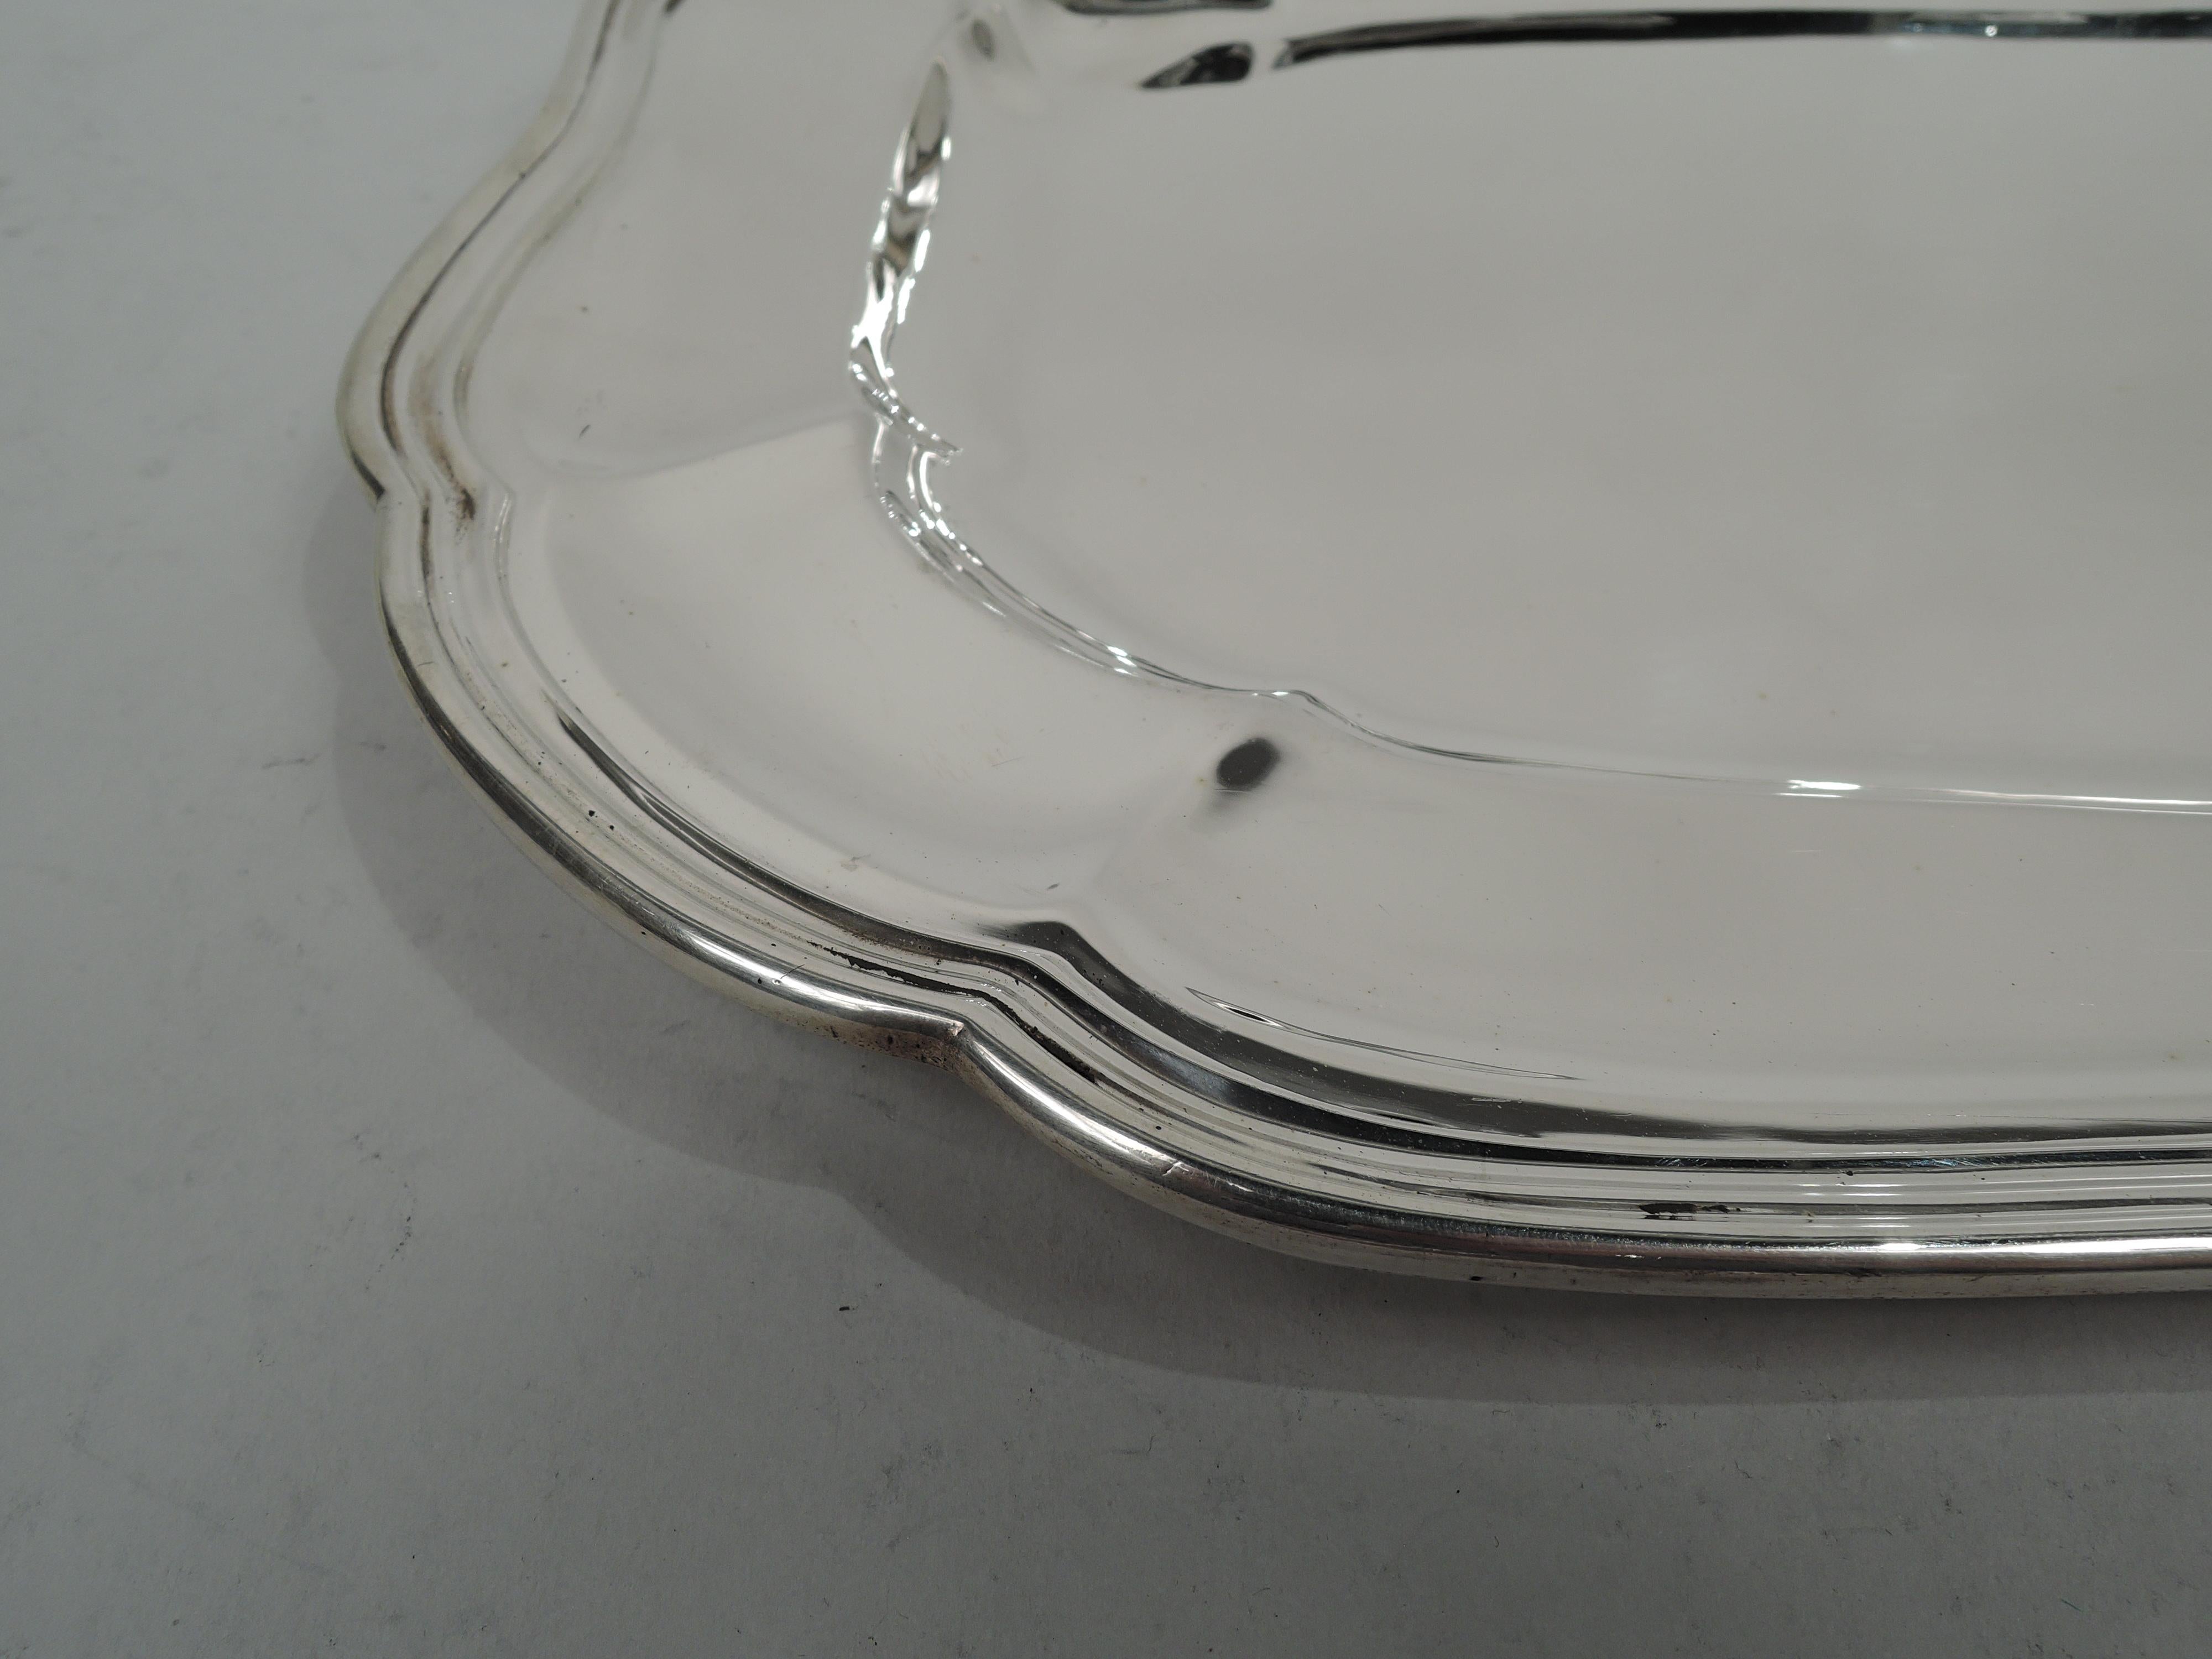 American Edwardian Classical sterling silver tray, ca 1910. Rectangular well with curved corners, tapering and paneled shoulder, and molded serpentine rim. Fully marked including retailer’s stamp (Bailey, Banks & Biddle) and no. 1088. Heavy weight: